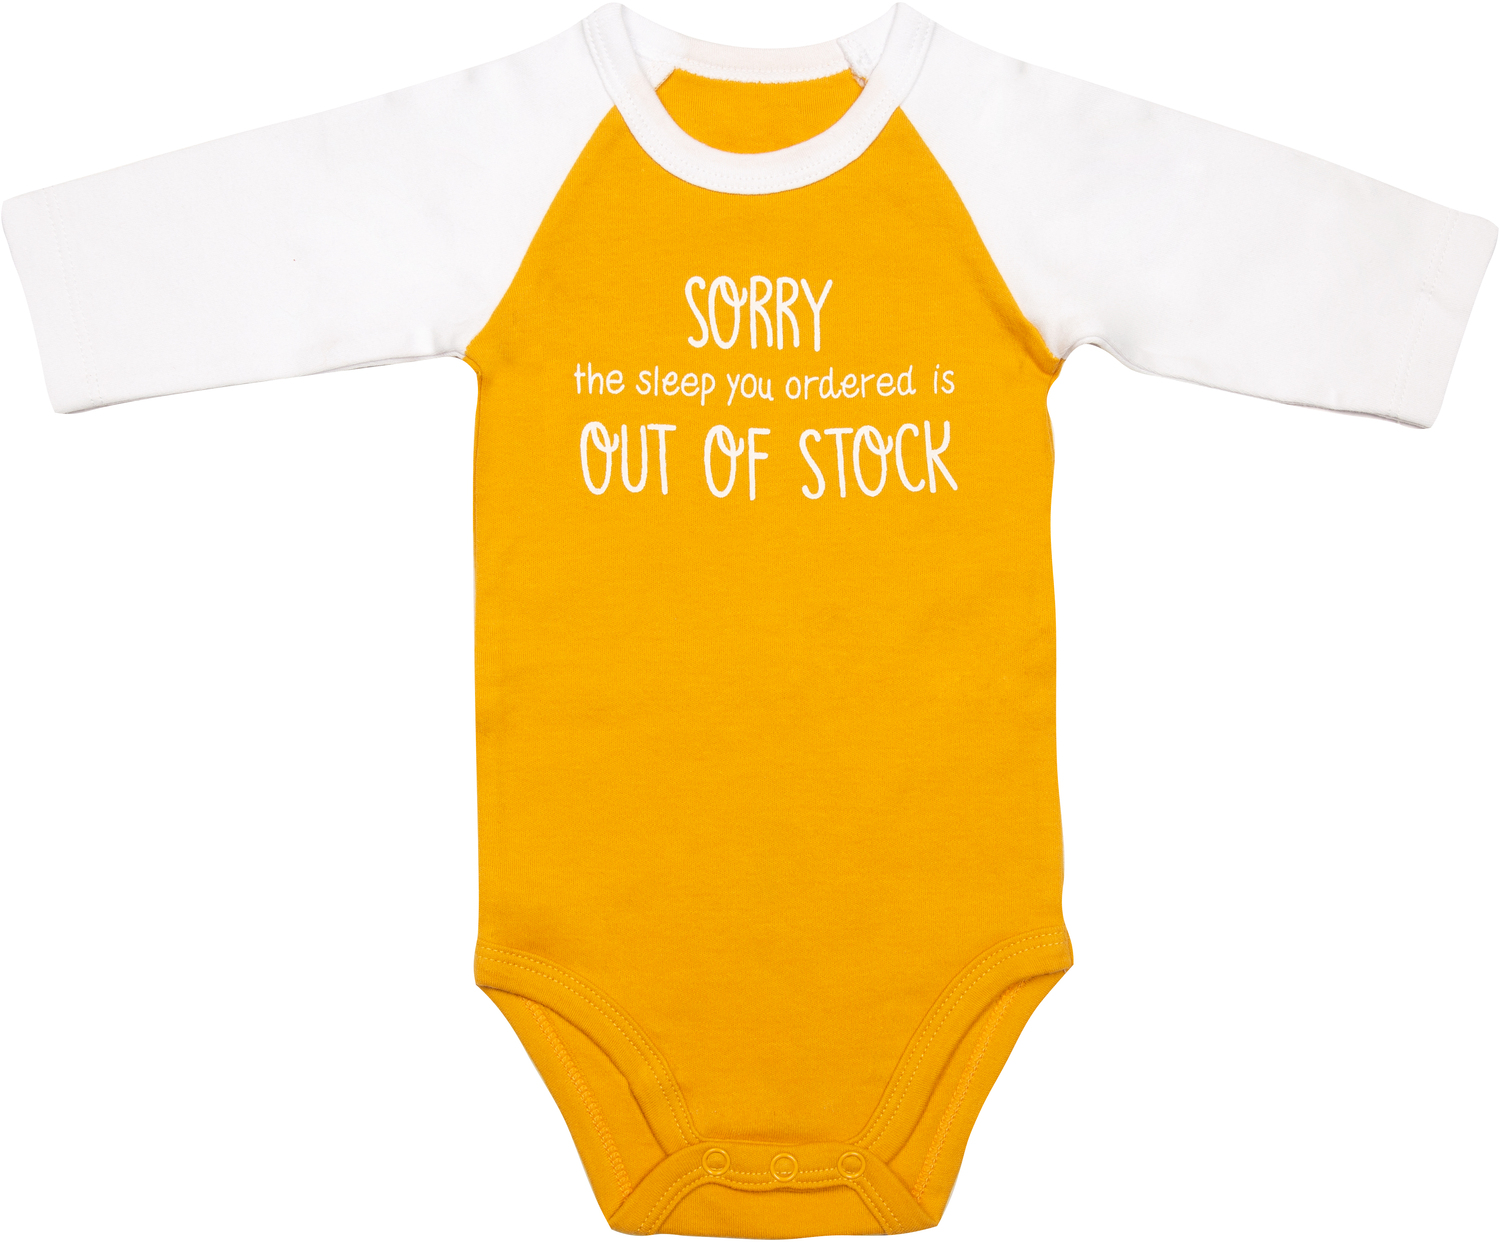 Out of Stock by Sidewalk Talk - Out of Stock - 6-12 Months
3/4 Length Sleeve Mustard Onesie